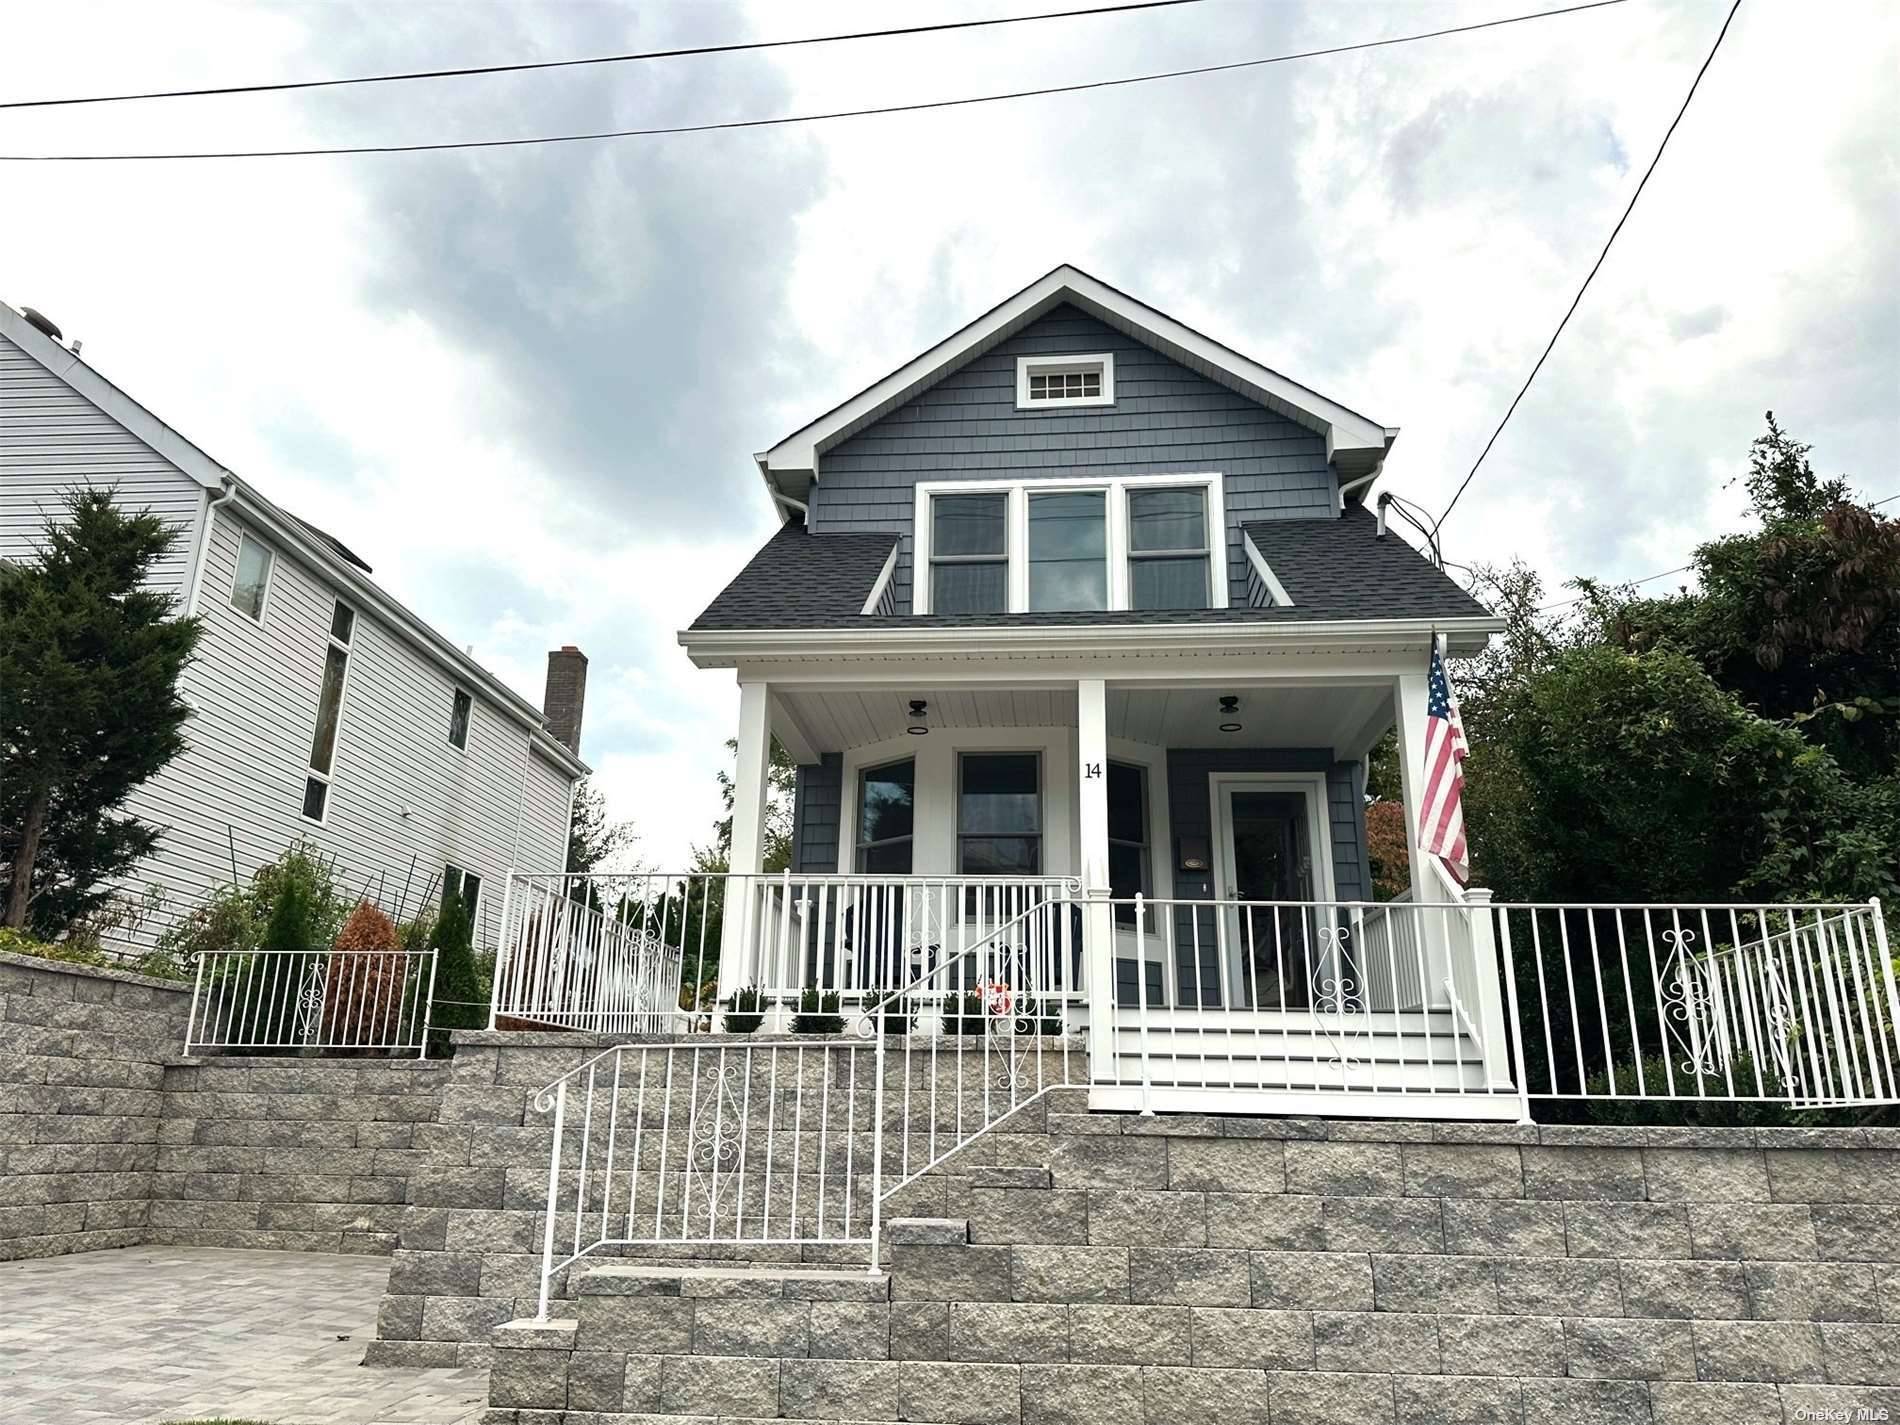 Entirely renovated, a Whole house for rent, 3 Bedroom, 2 Full Bath, 1 Powder Room, Guest Room on the third floor, Eat in Kitchen, Dining Living, All brand new appliances, ...